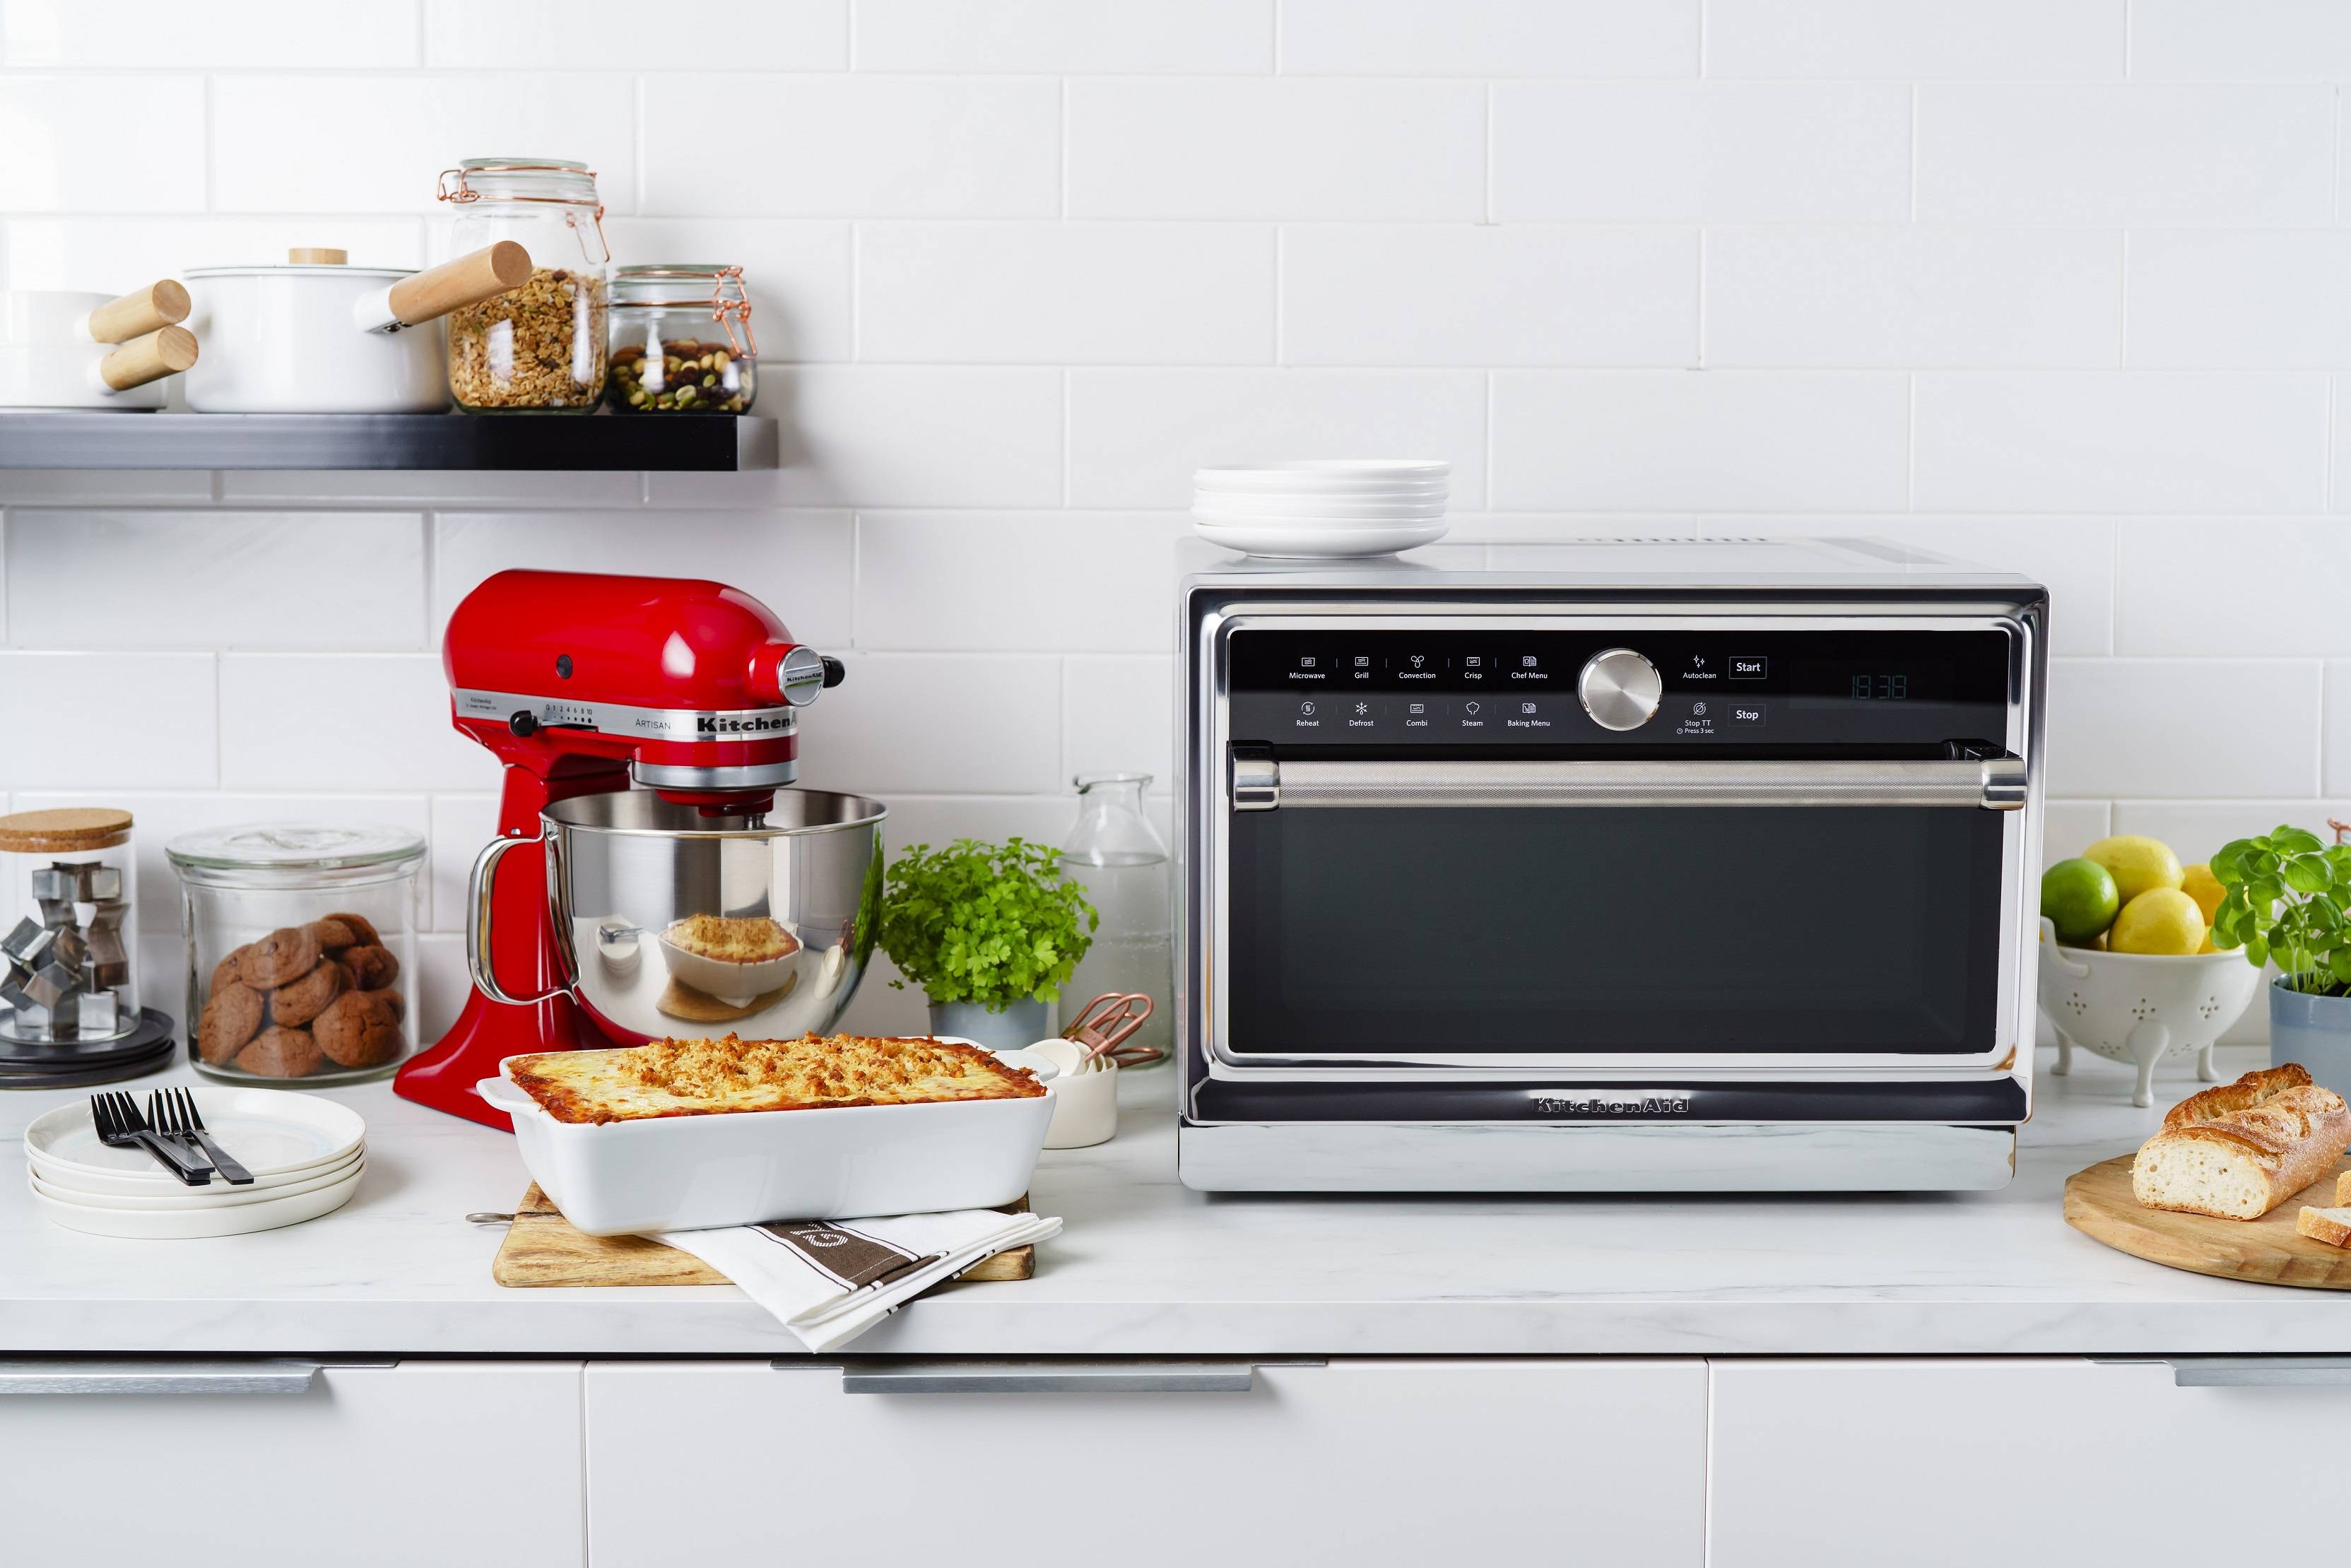 Samsung Microwave Oven Service Center in Pune